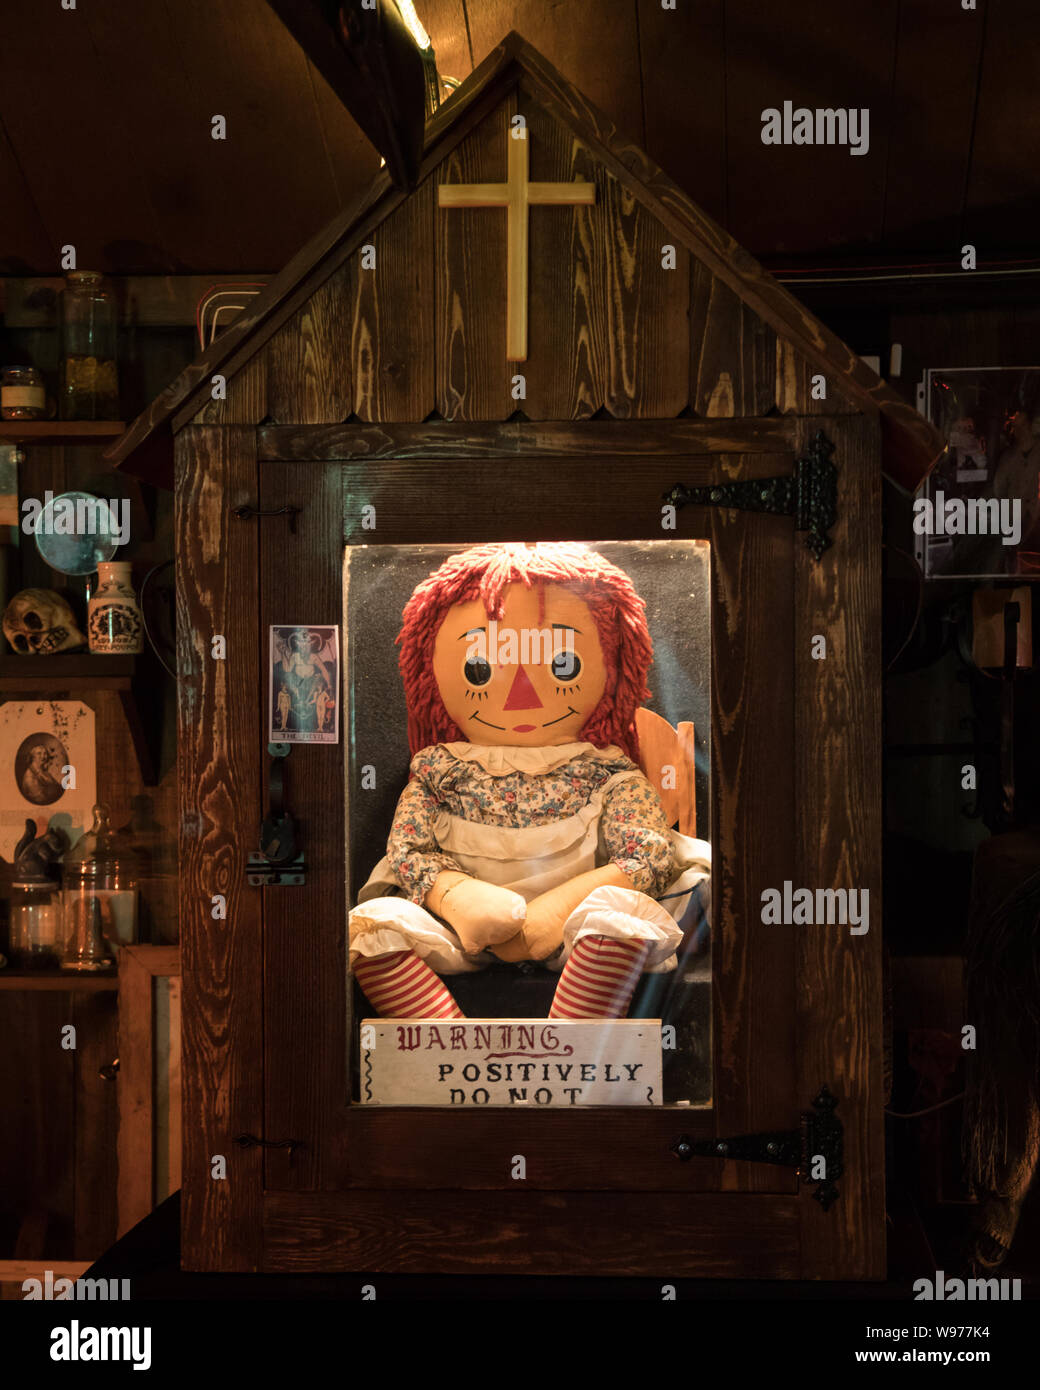 Annabelle Comes Home': The Real Stories Behind The Artifacts – The